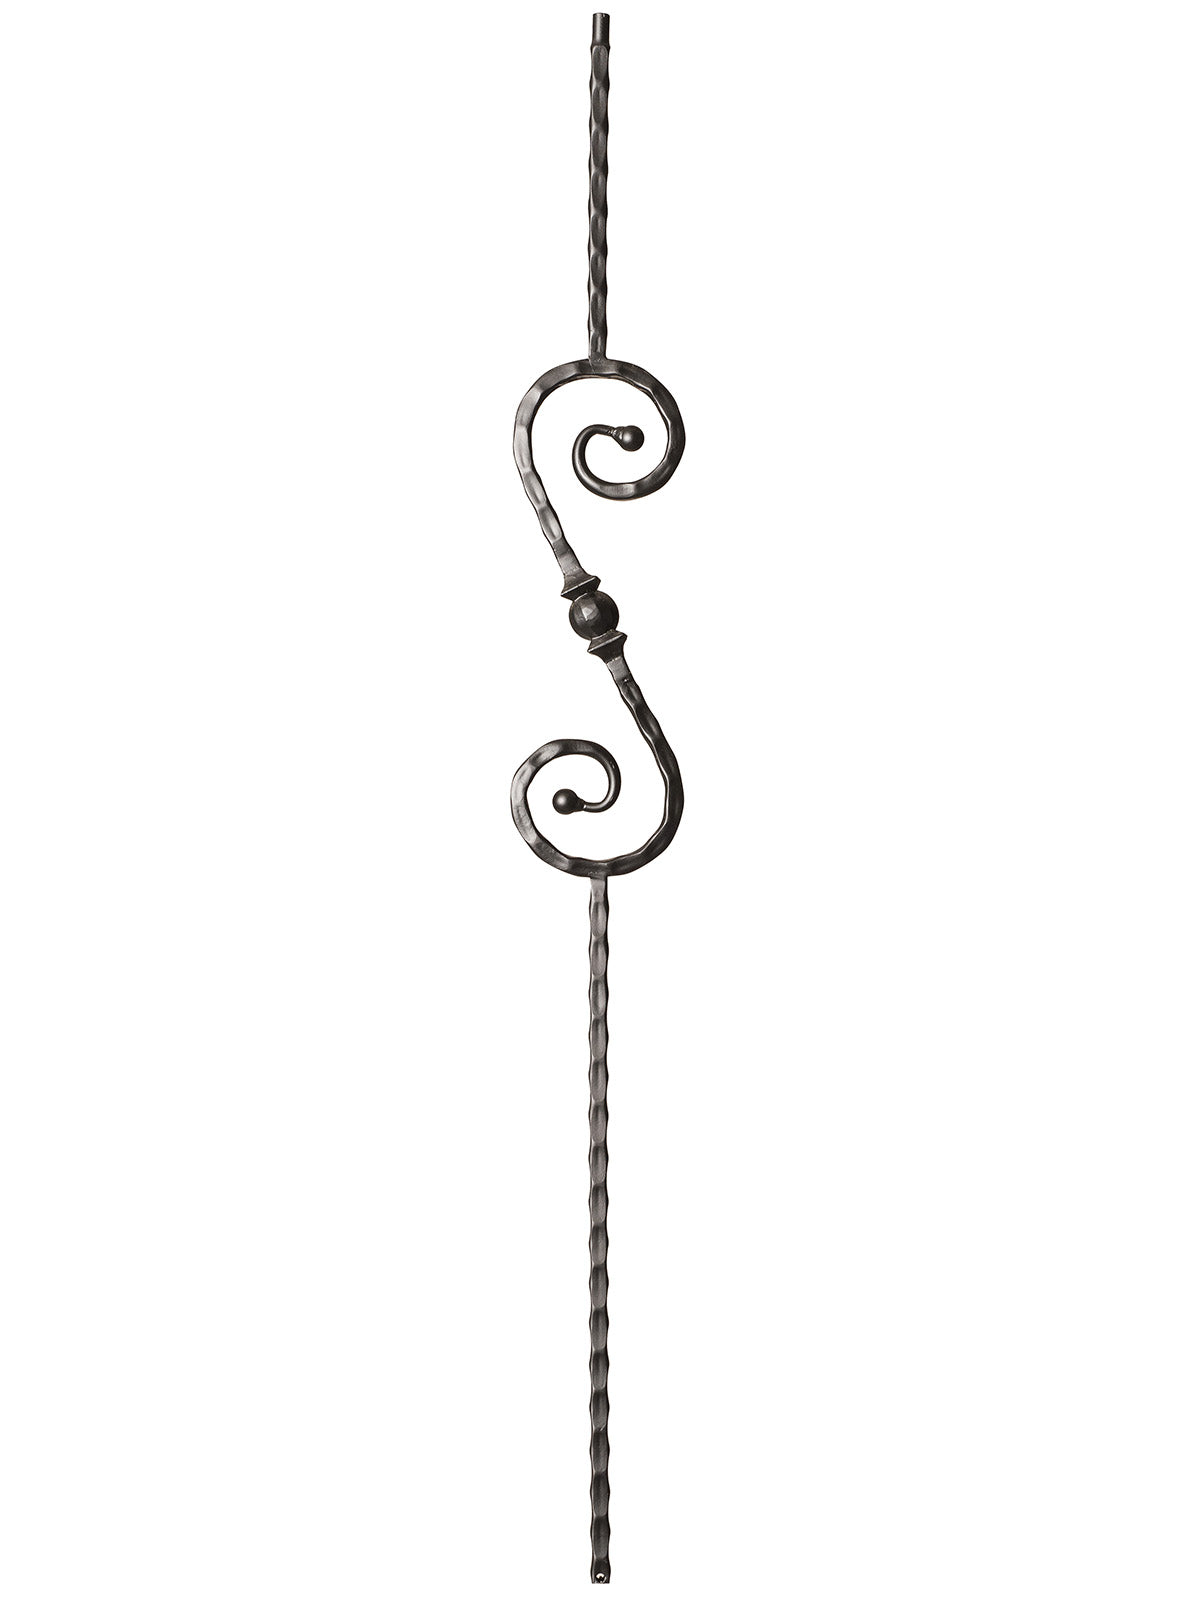 Iron Baluster 9034 - 9/16" Hammered Face - S Scroll With Ball